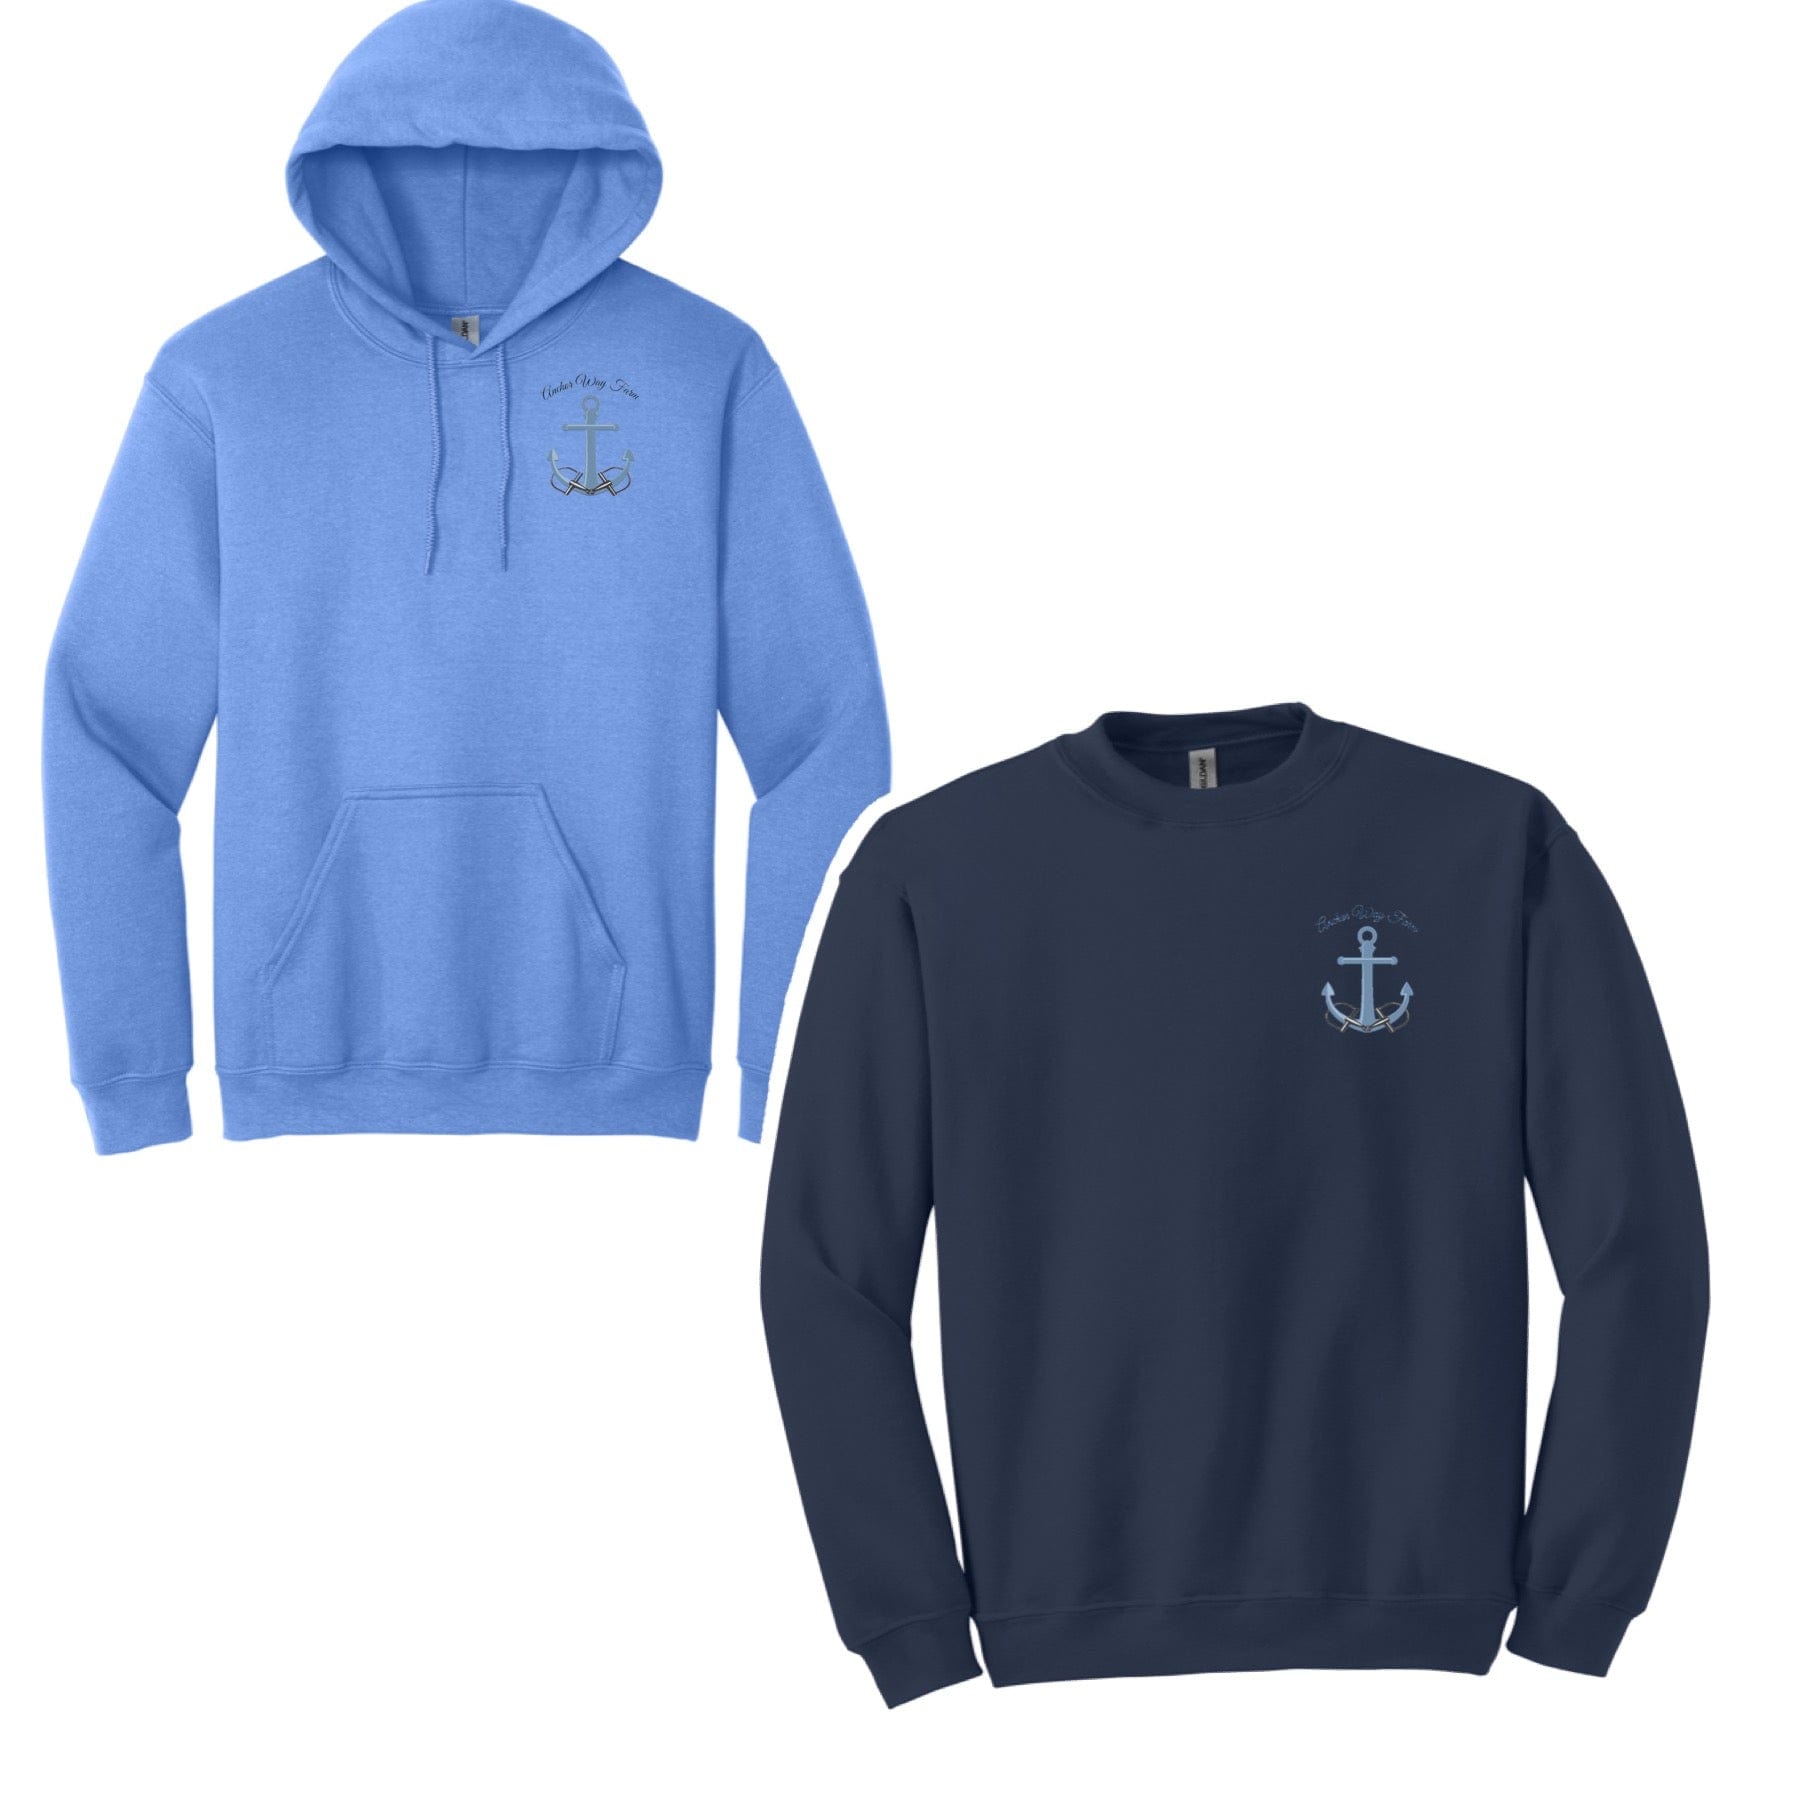 Equestrian Team Apparel Anchor Way Farm Hoodie and Sweatshirt equestrian team apparel online tack store mobile tack store custom farm apparel custom show stable clothing equestrian lifestyle horse show clothing riding clothes horses equestrian tack store